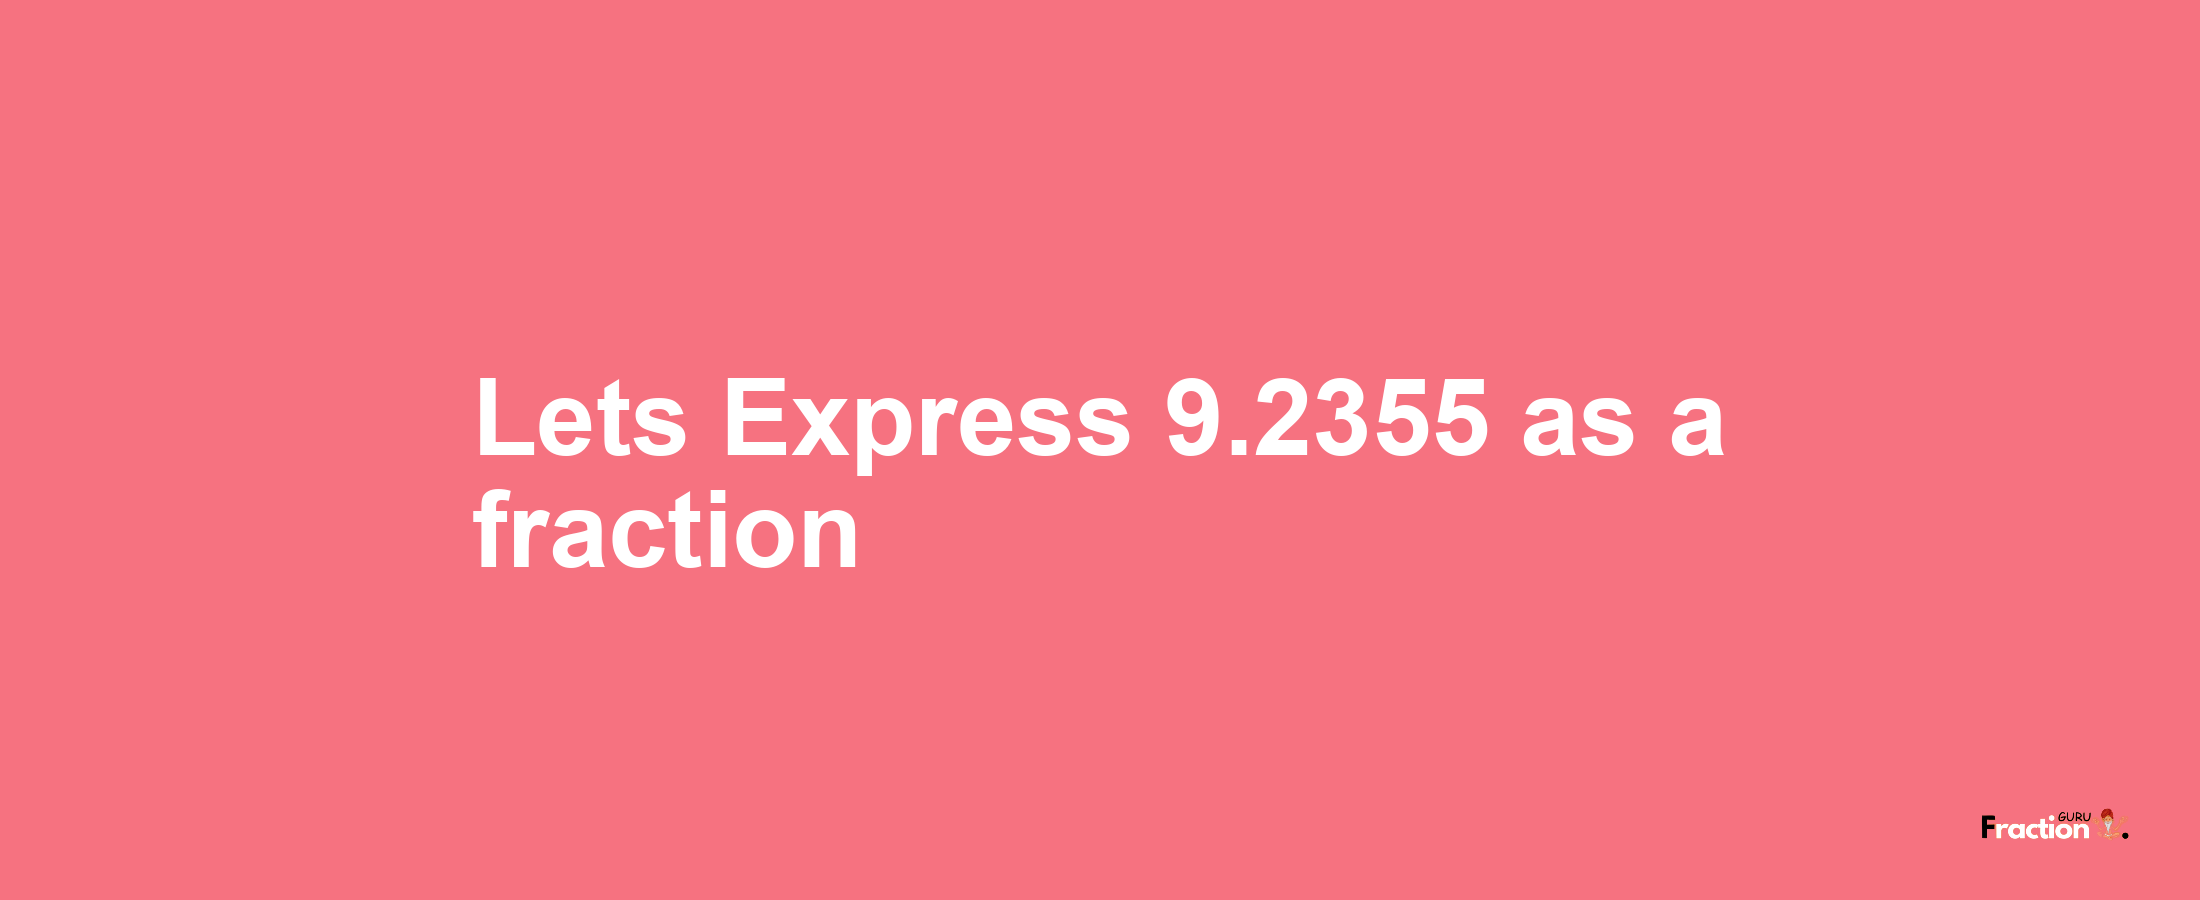 Lets Express 9.2355 as afraction